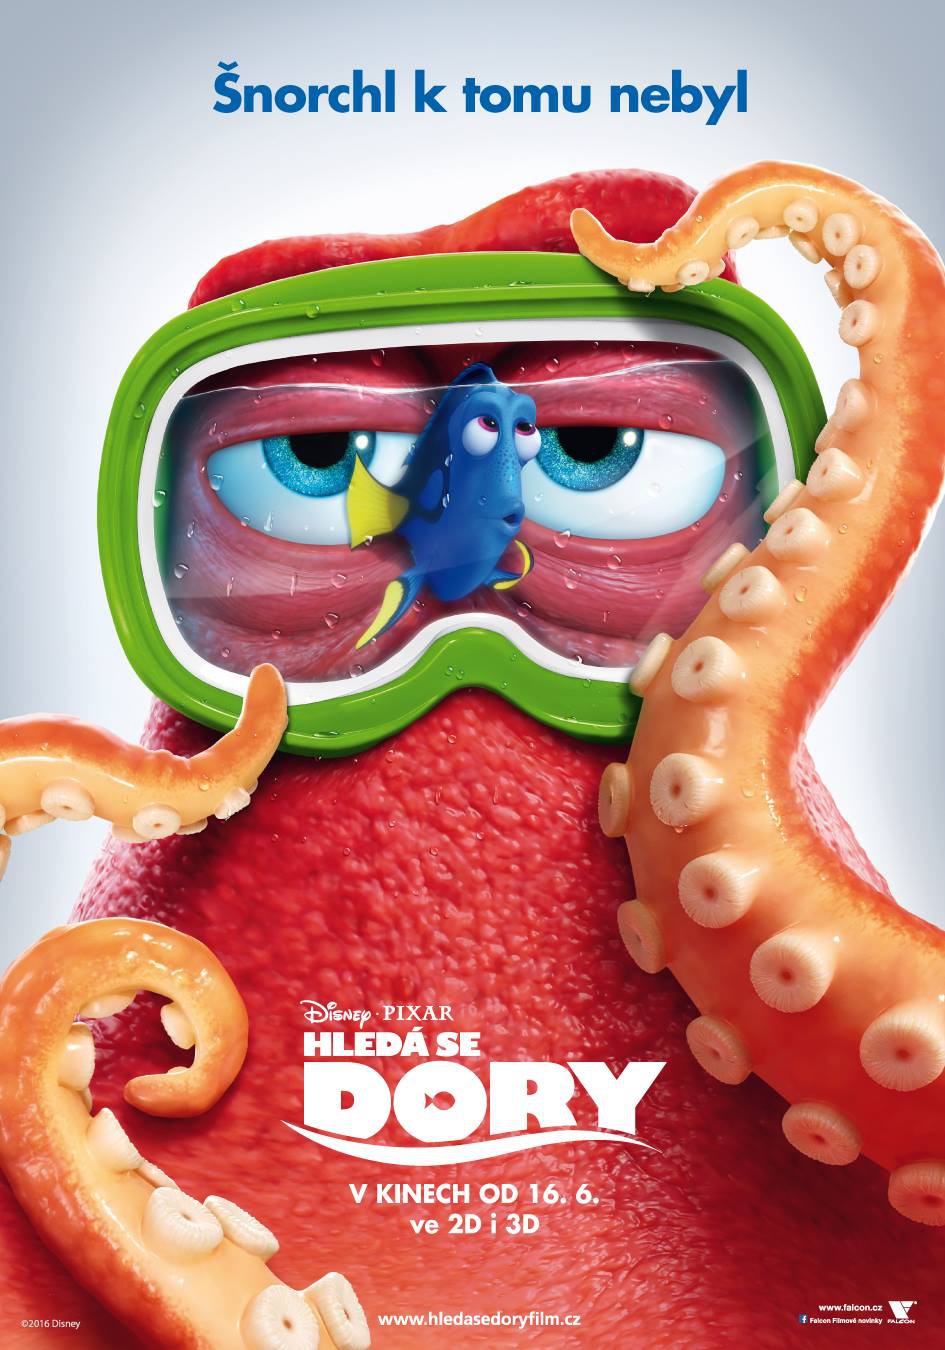 Extra Large Movie Poster Image for Finding Dory (#15 of 23)